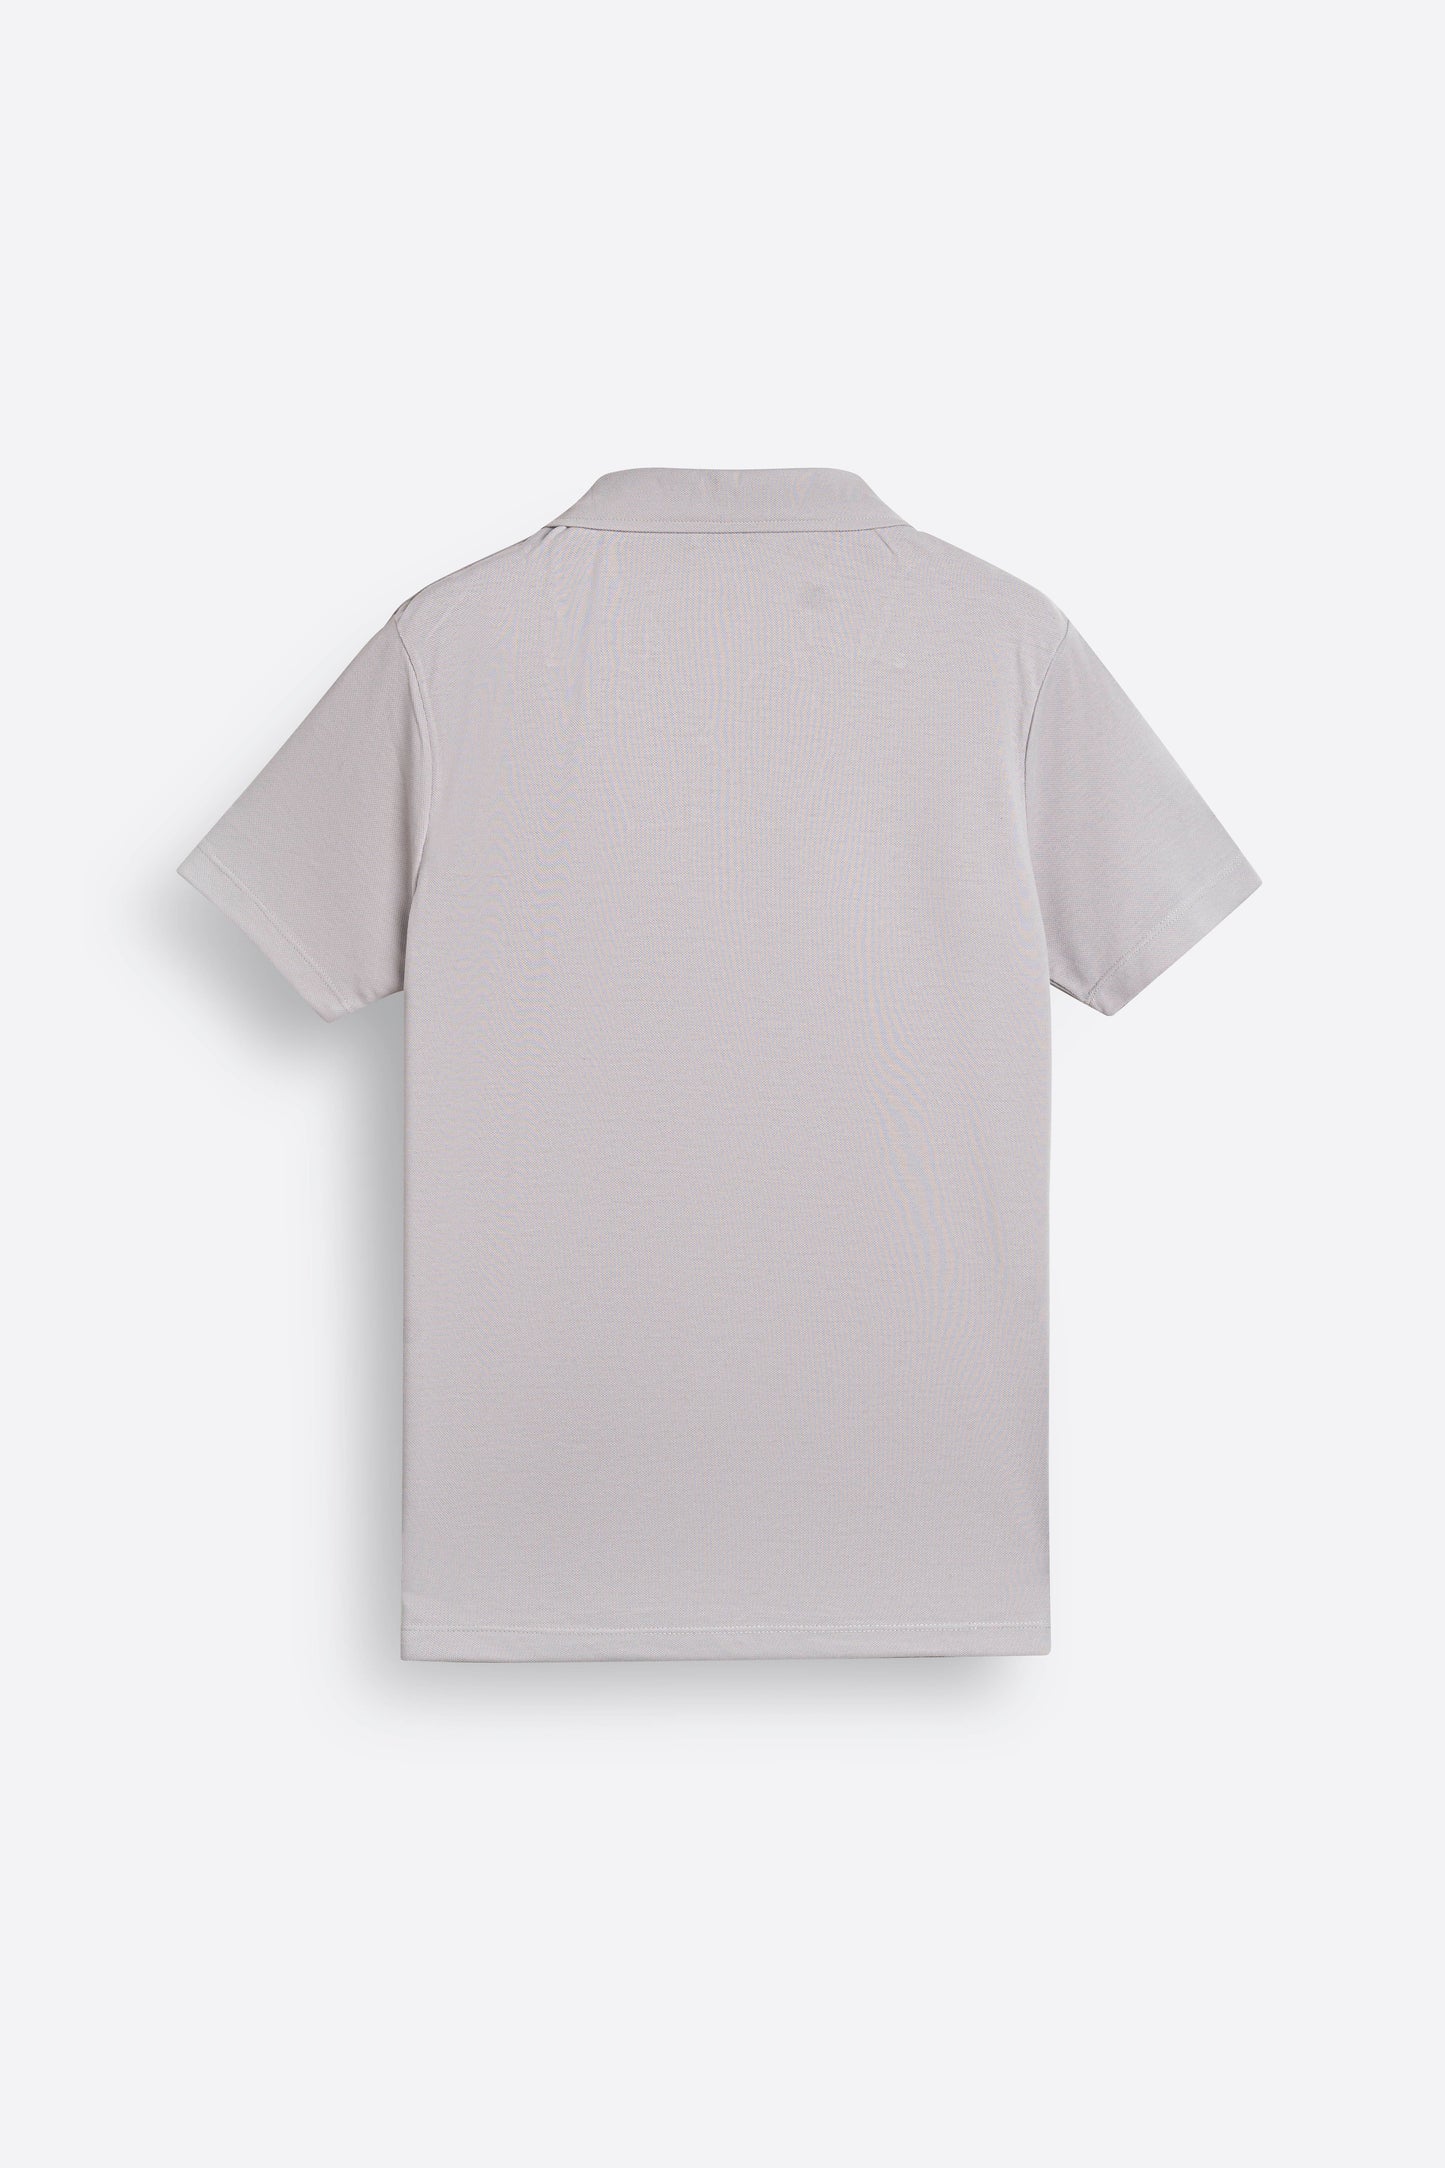 Revere Polo Shirt in Cloud Grey